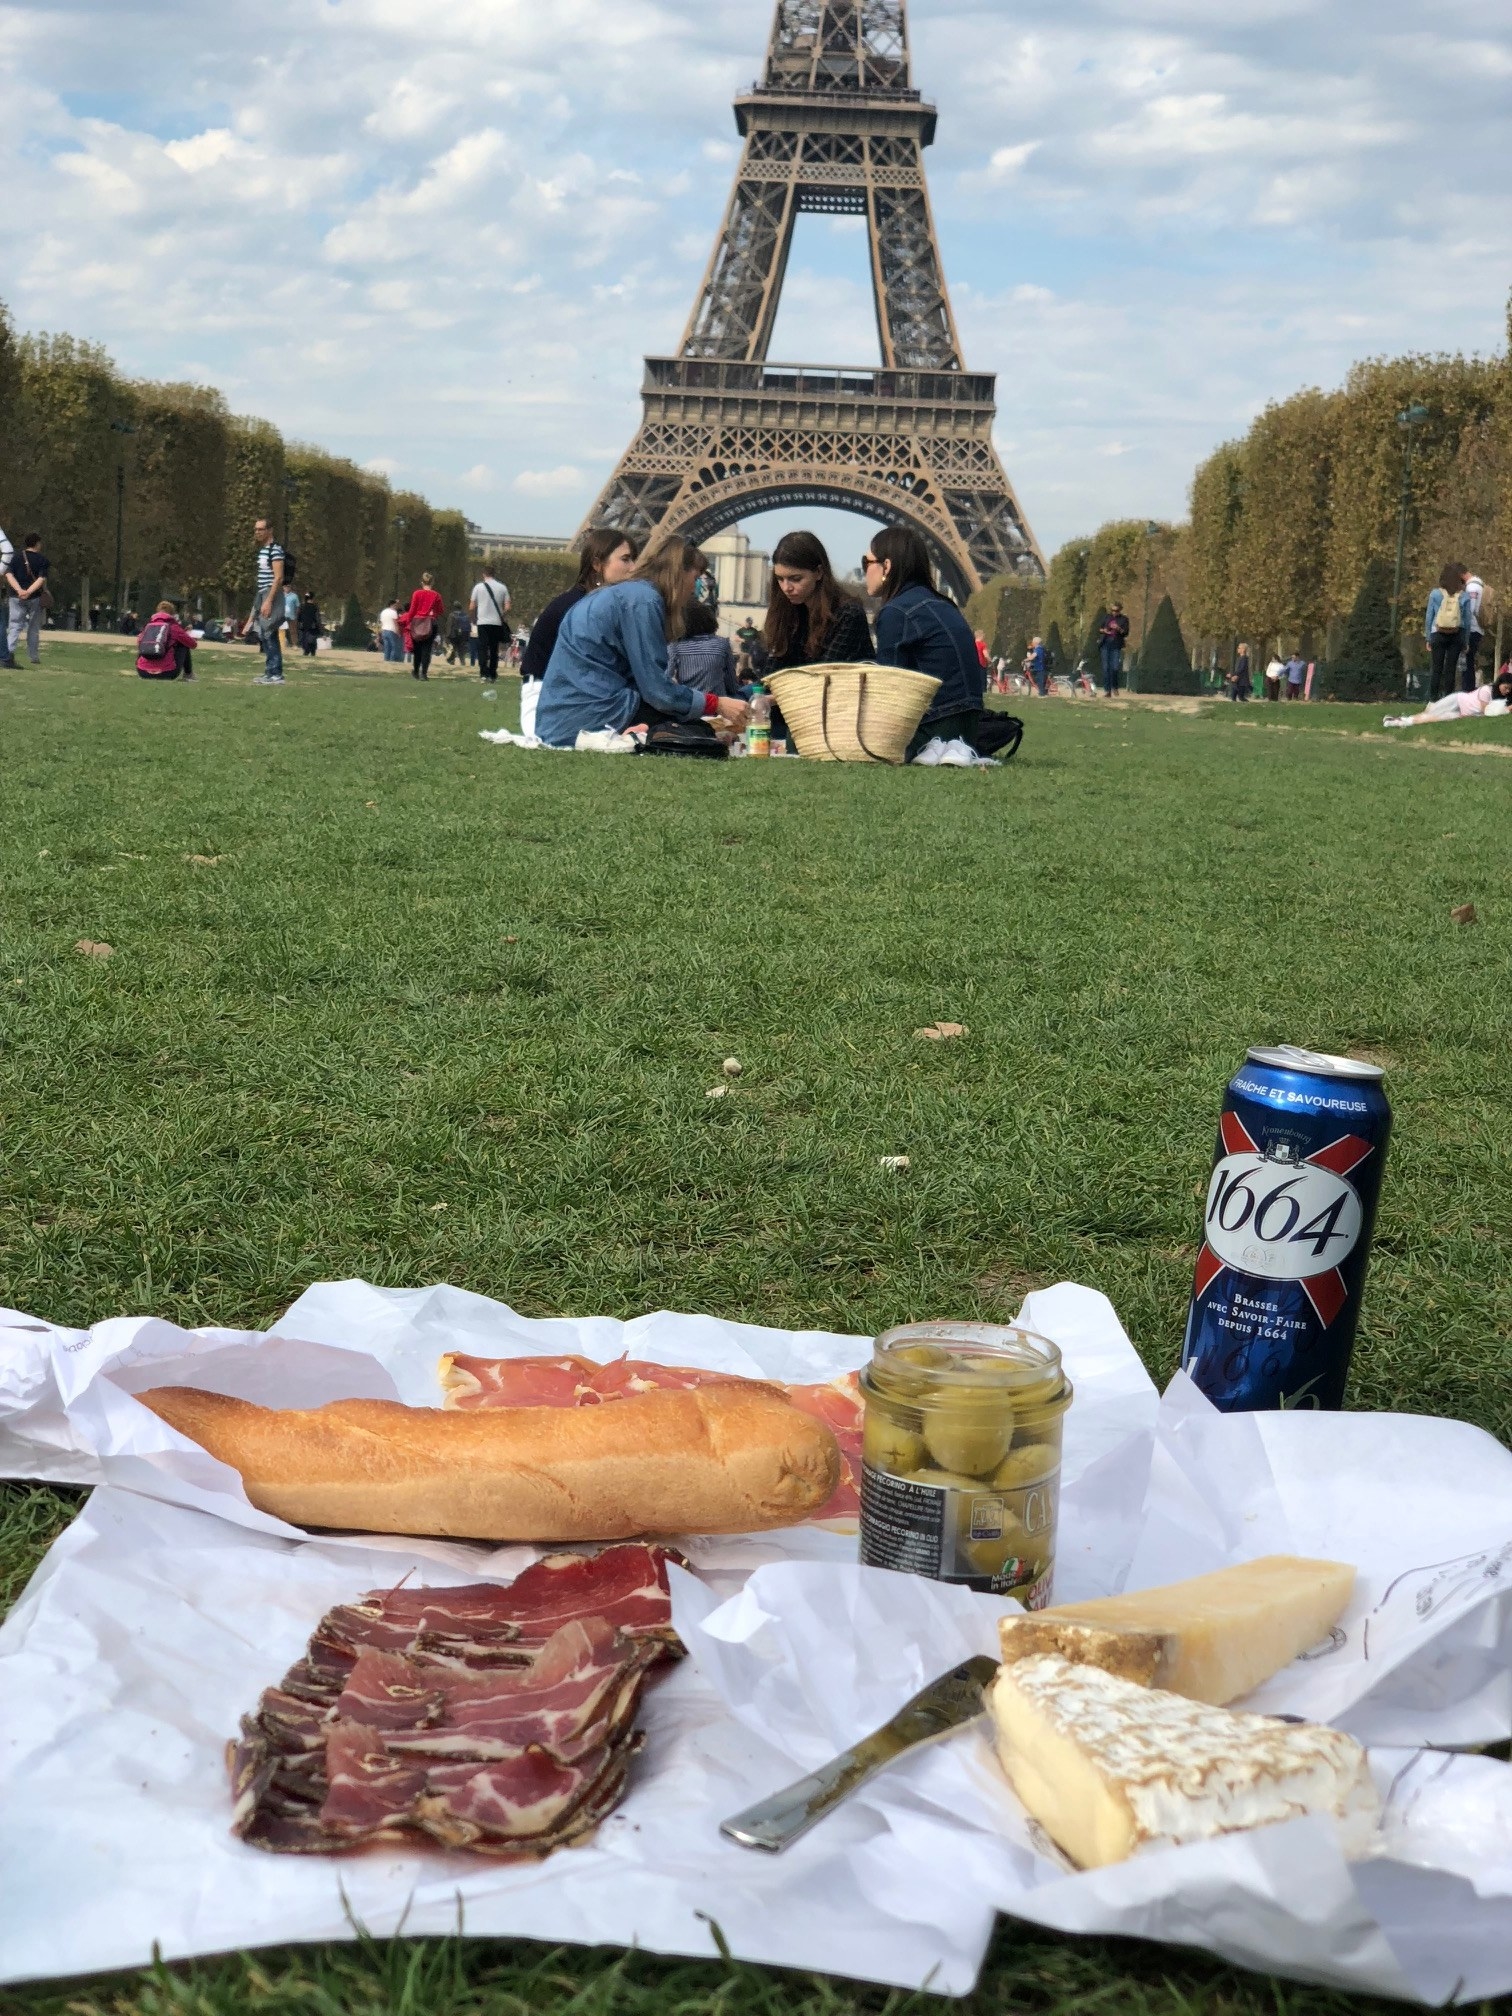 A picnic in Paris by the Eiffel Tower.